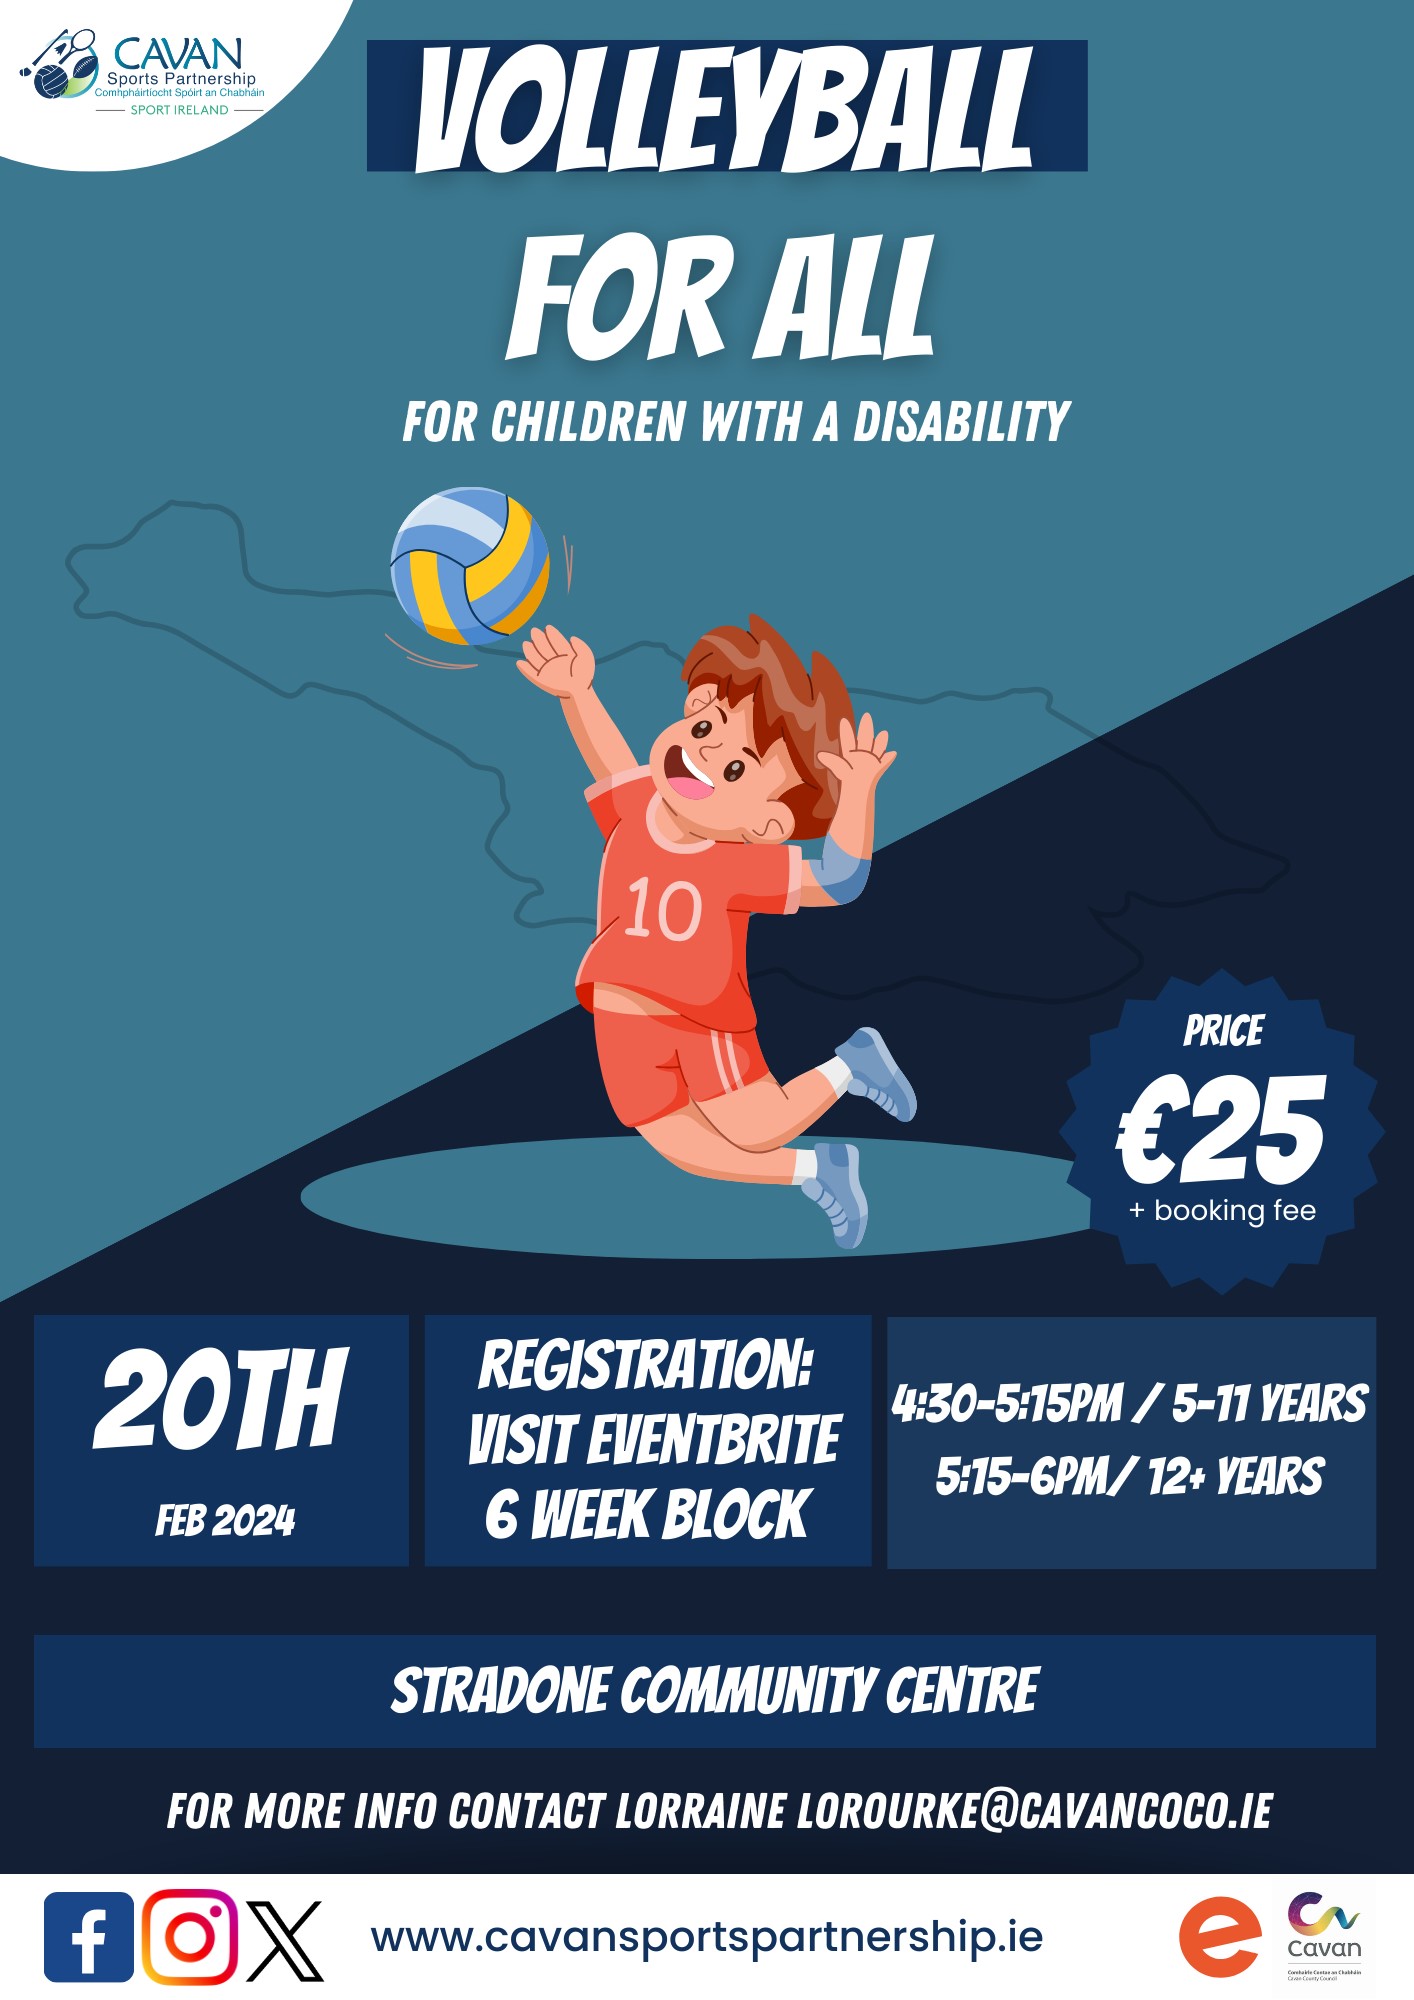 New Volleyball For All Programme starting in Stradone